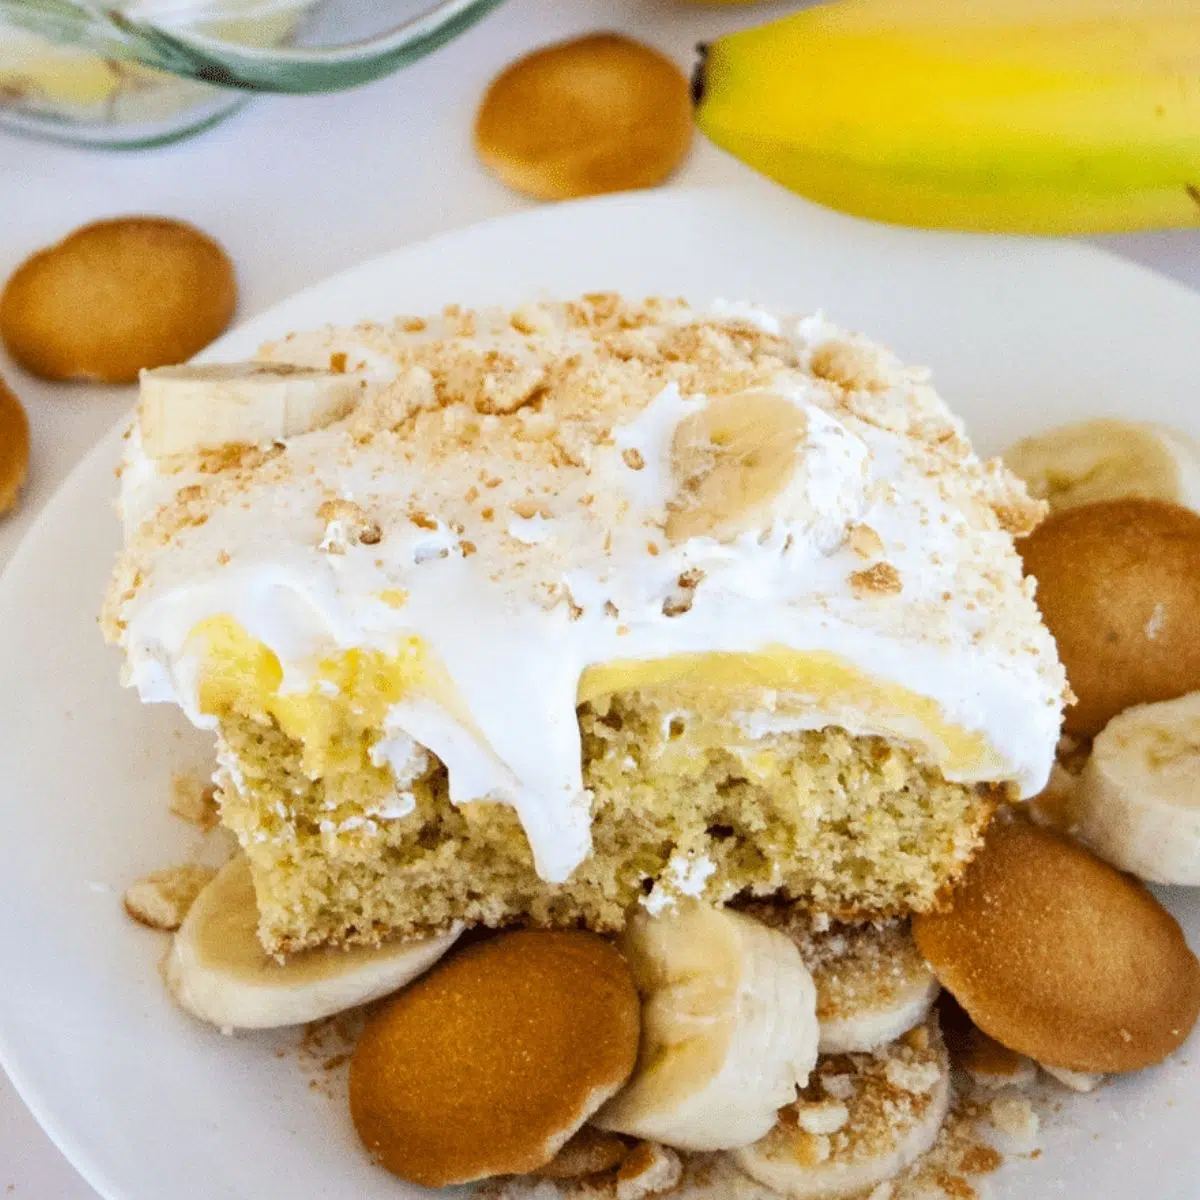 Delicious slice of banana pudding poke cake served with more bananas and Nilla wafers on white plate.